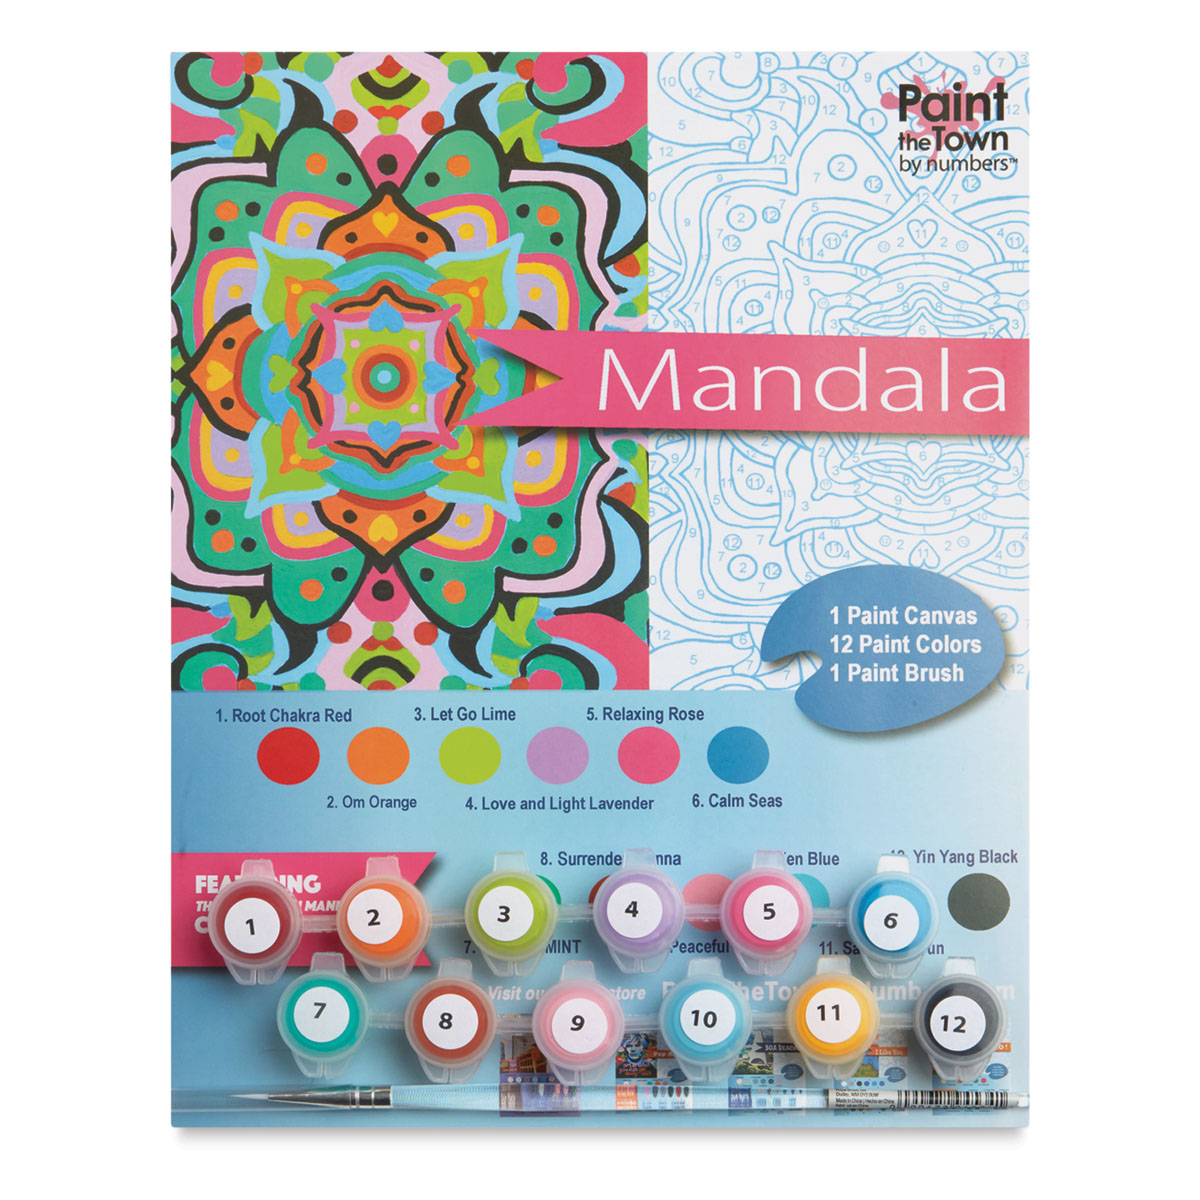 Mandala Color By Number: 50+ Color by Number Coloring Book for